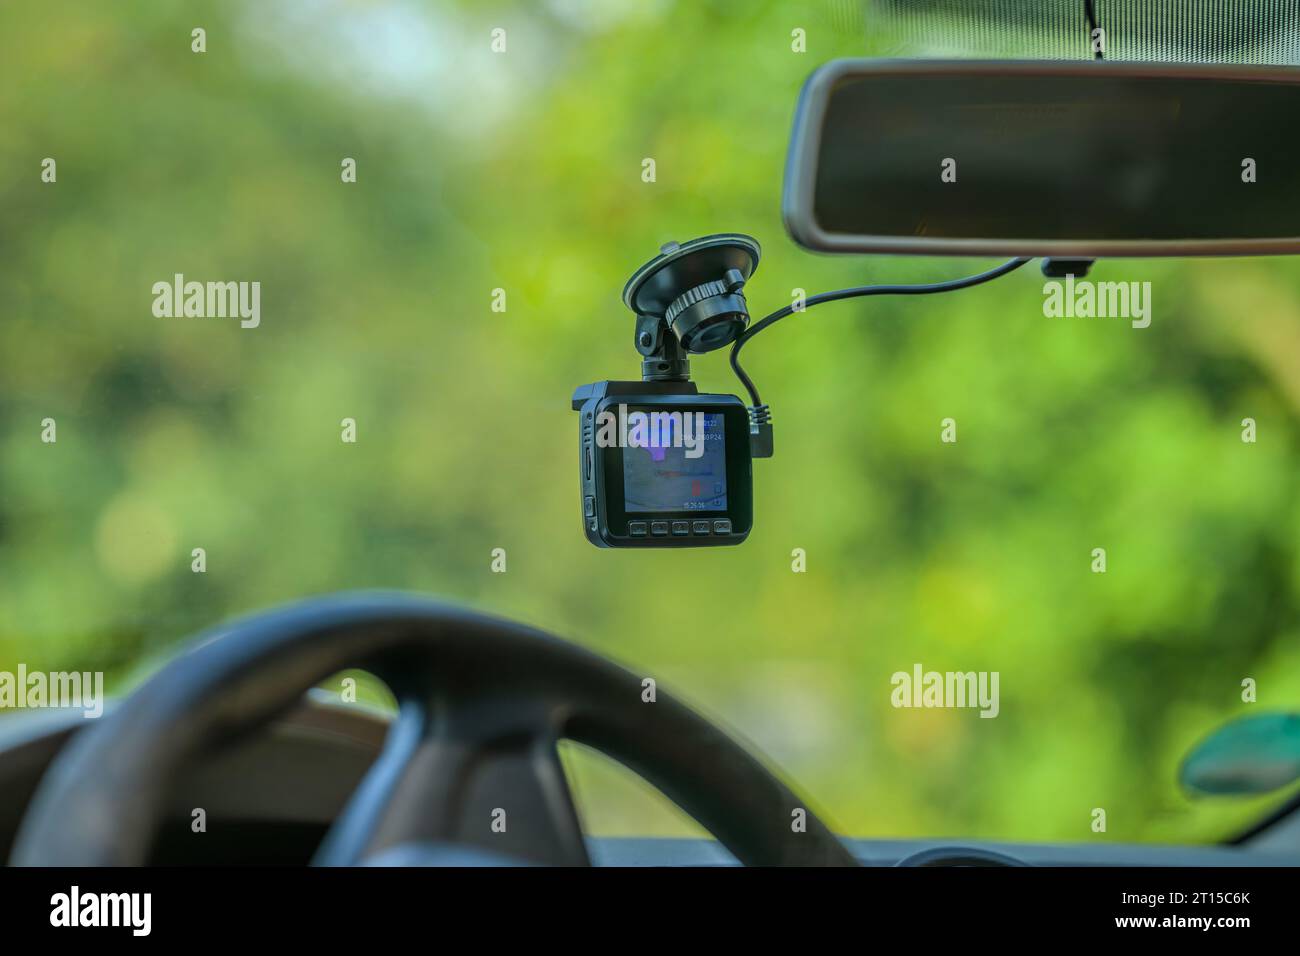 A dashcam on the windshield of a car Stock Photo